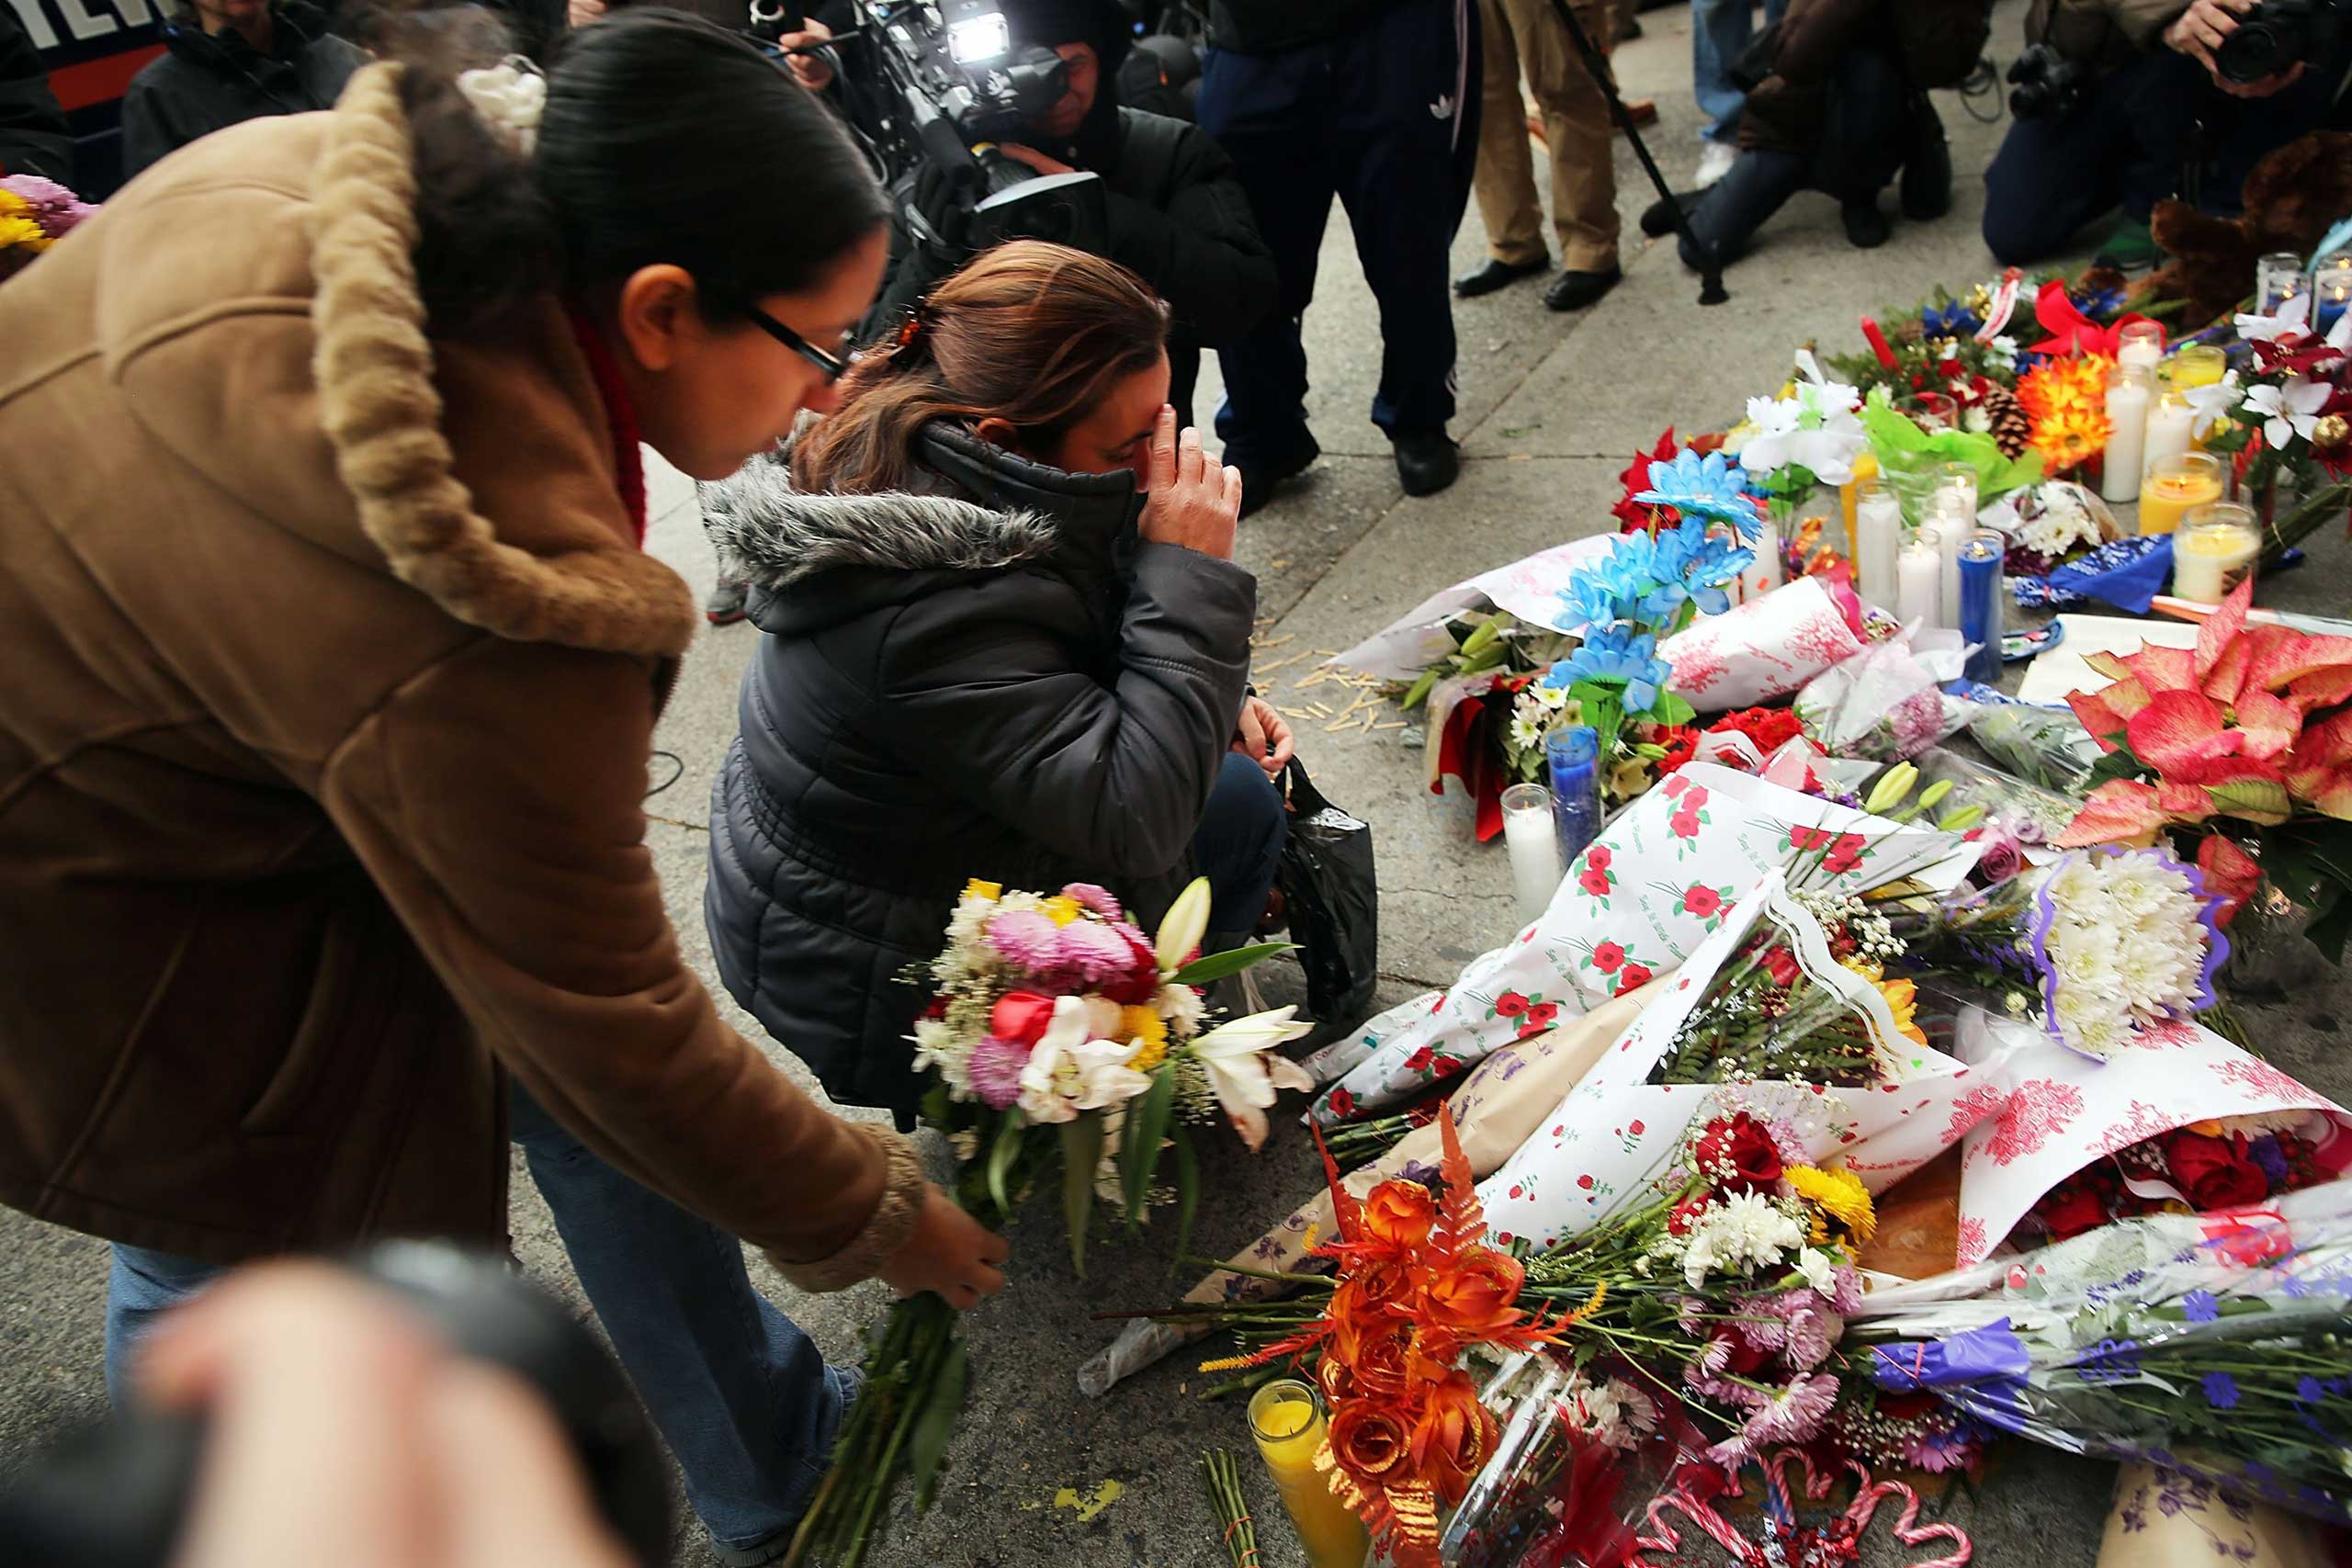 Women place flowers at a memorial to the two New York Police Department (NYPD) officers that were shot and killed nearby Dec. 21, 2014 in the Bedford Stuyvesant neighborhood of the Brooklyn borough of New York City. (Spencer Platt—Getty Images)